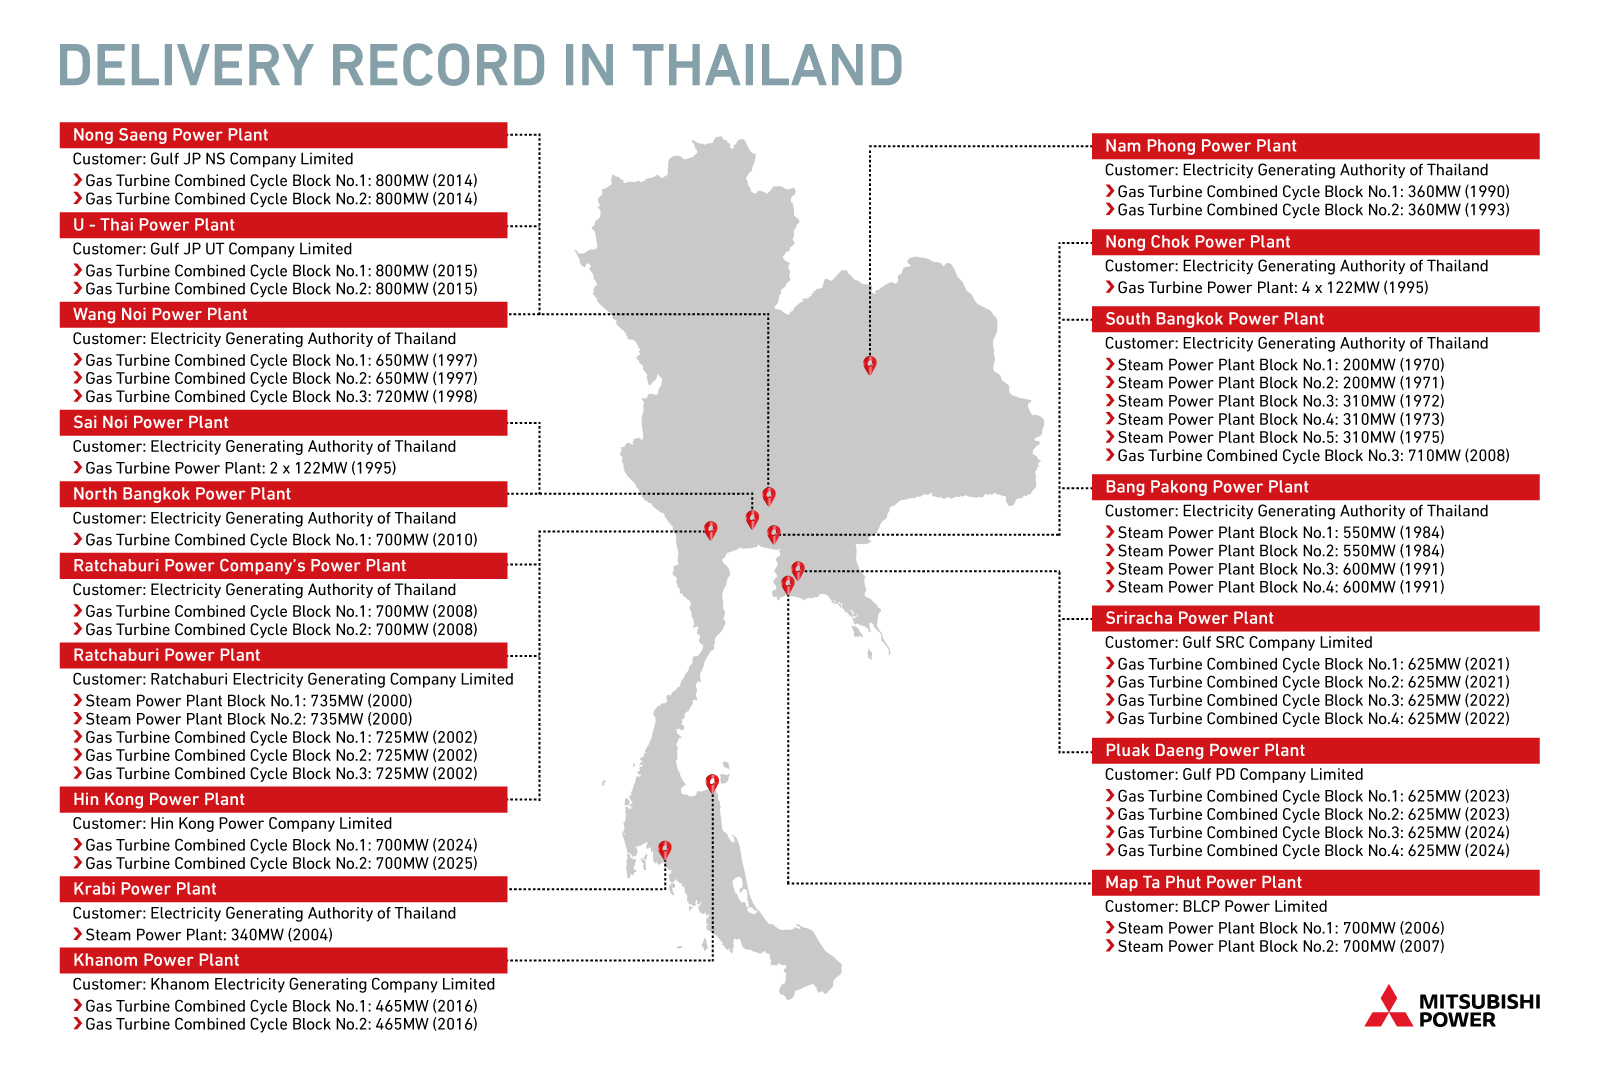 Delivery Record in Thailand